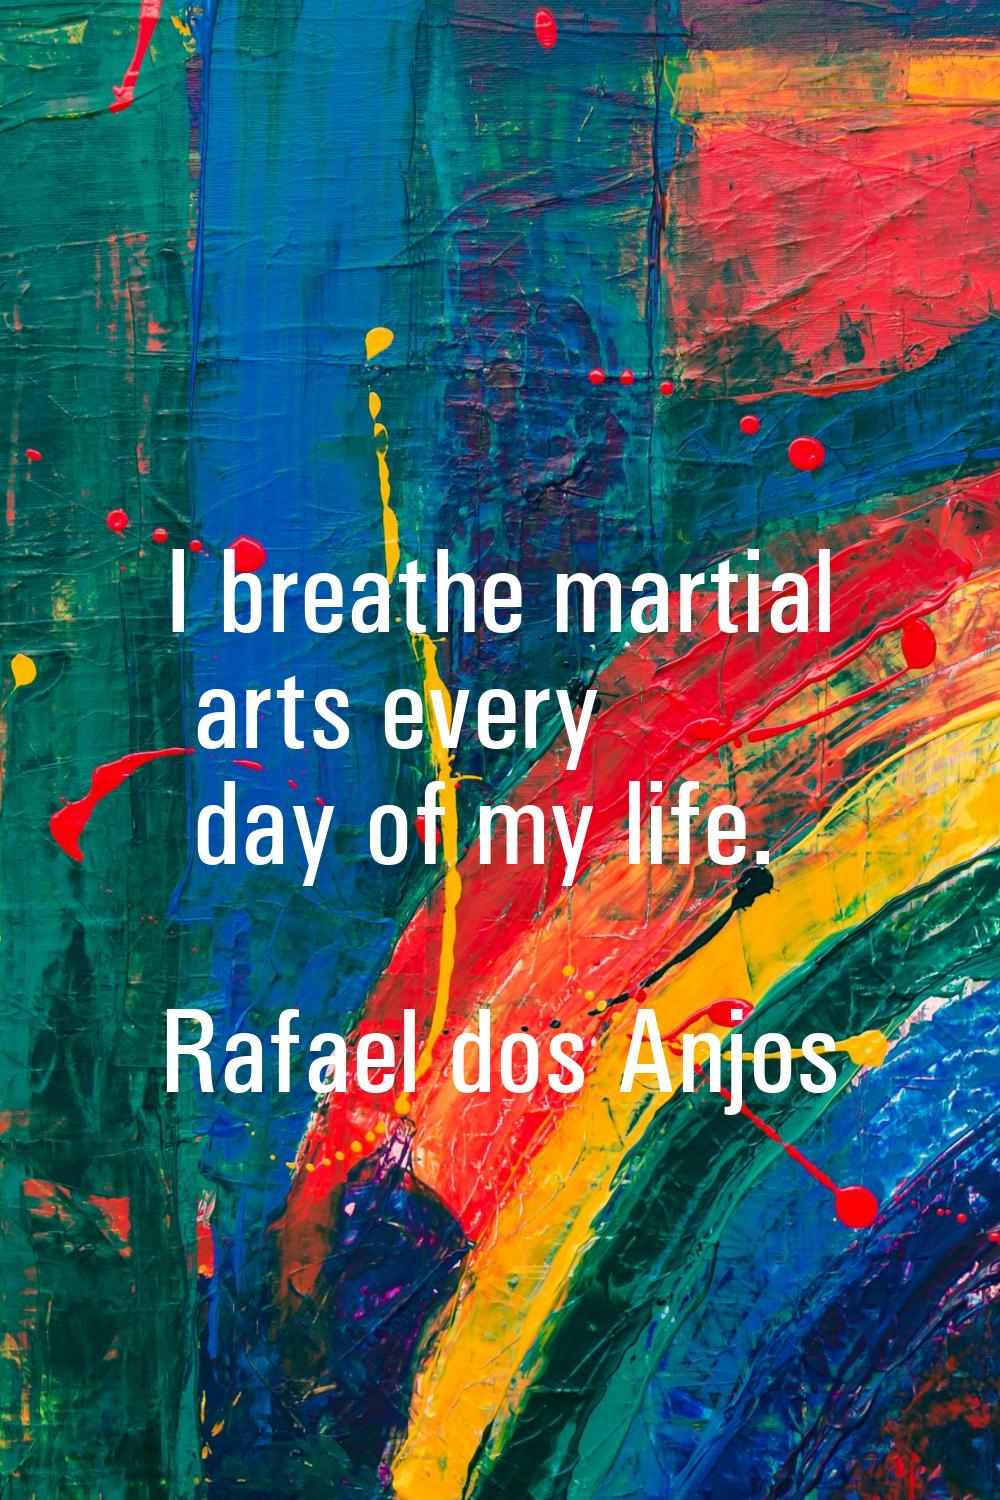 I breathe martial arts every day of my life.